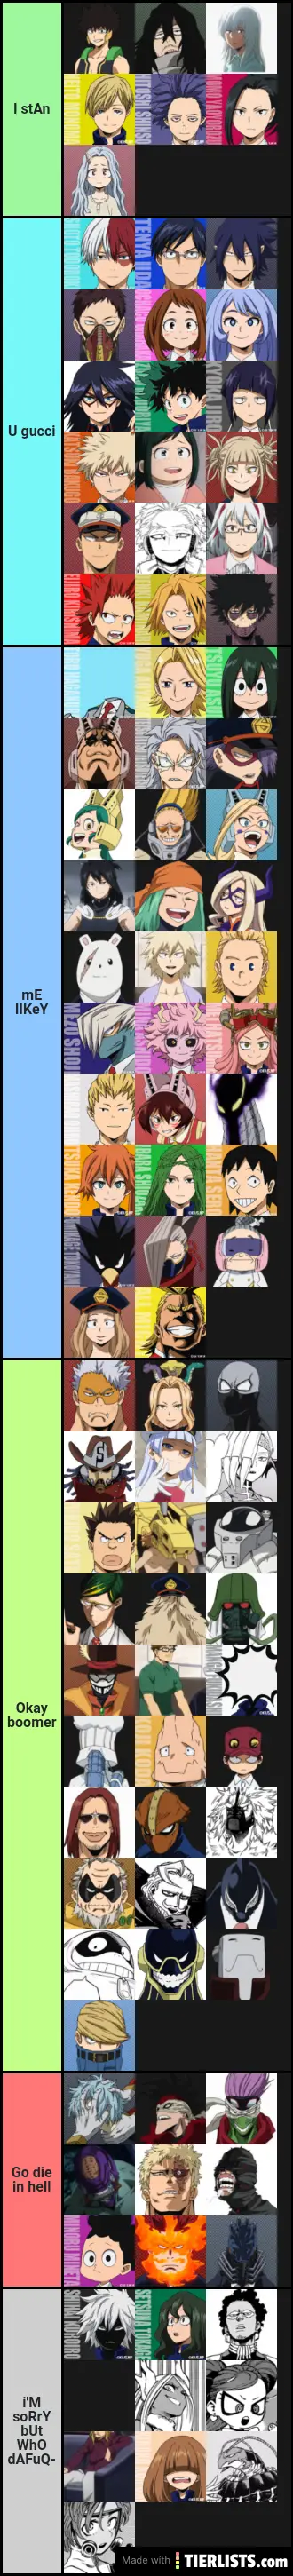 My weird ass opinion on BNHA characters